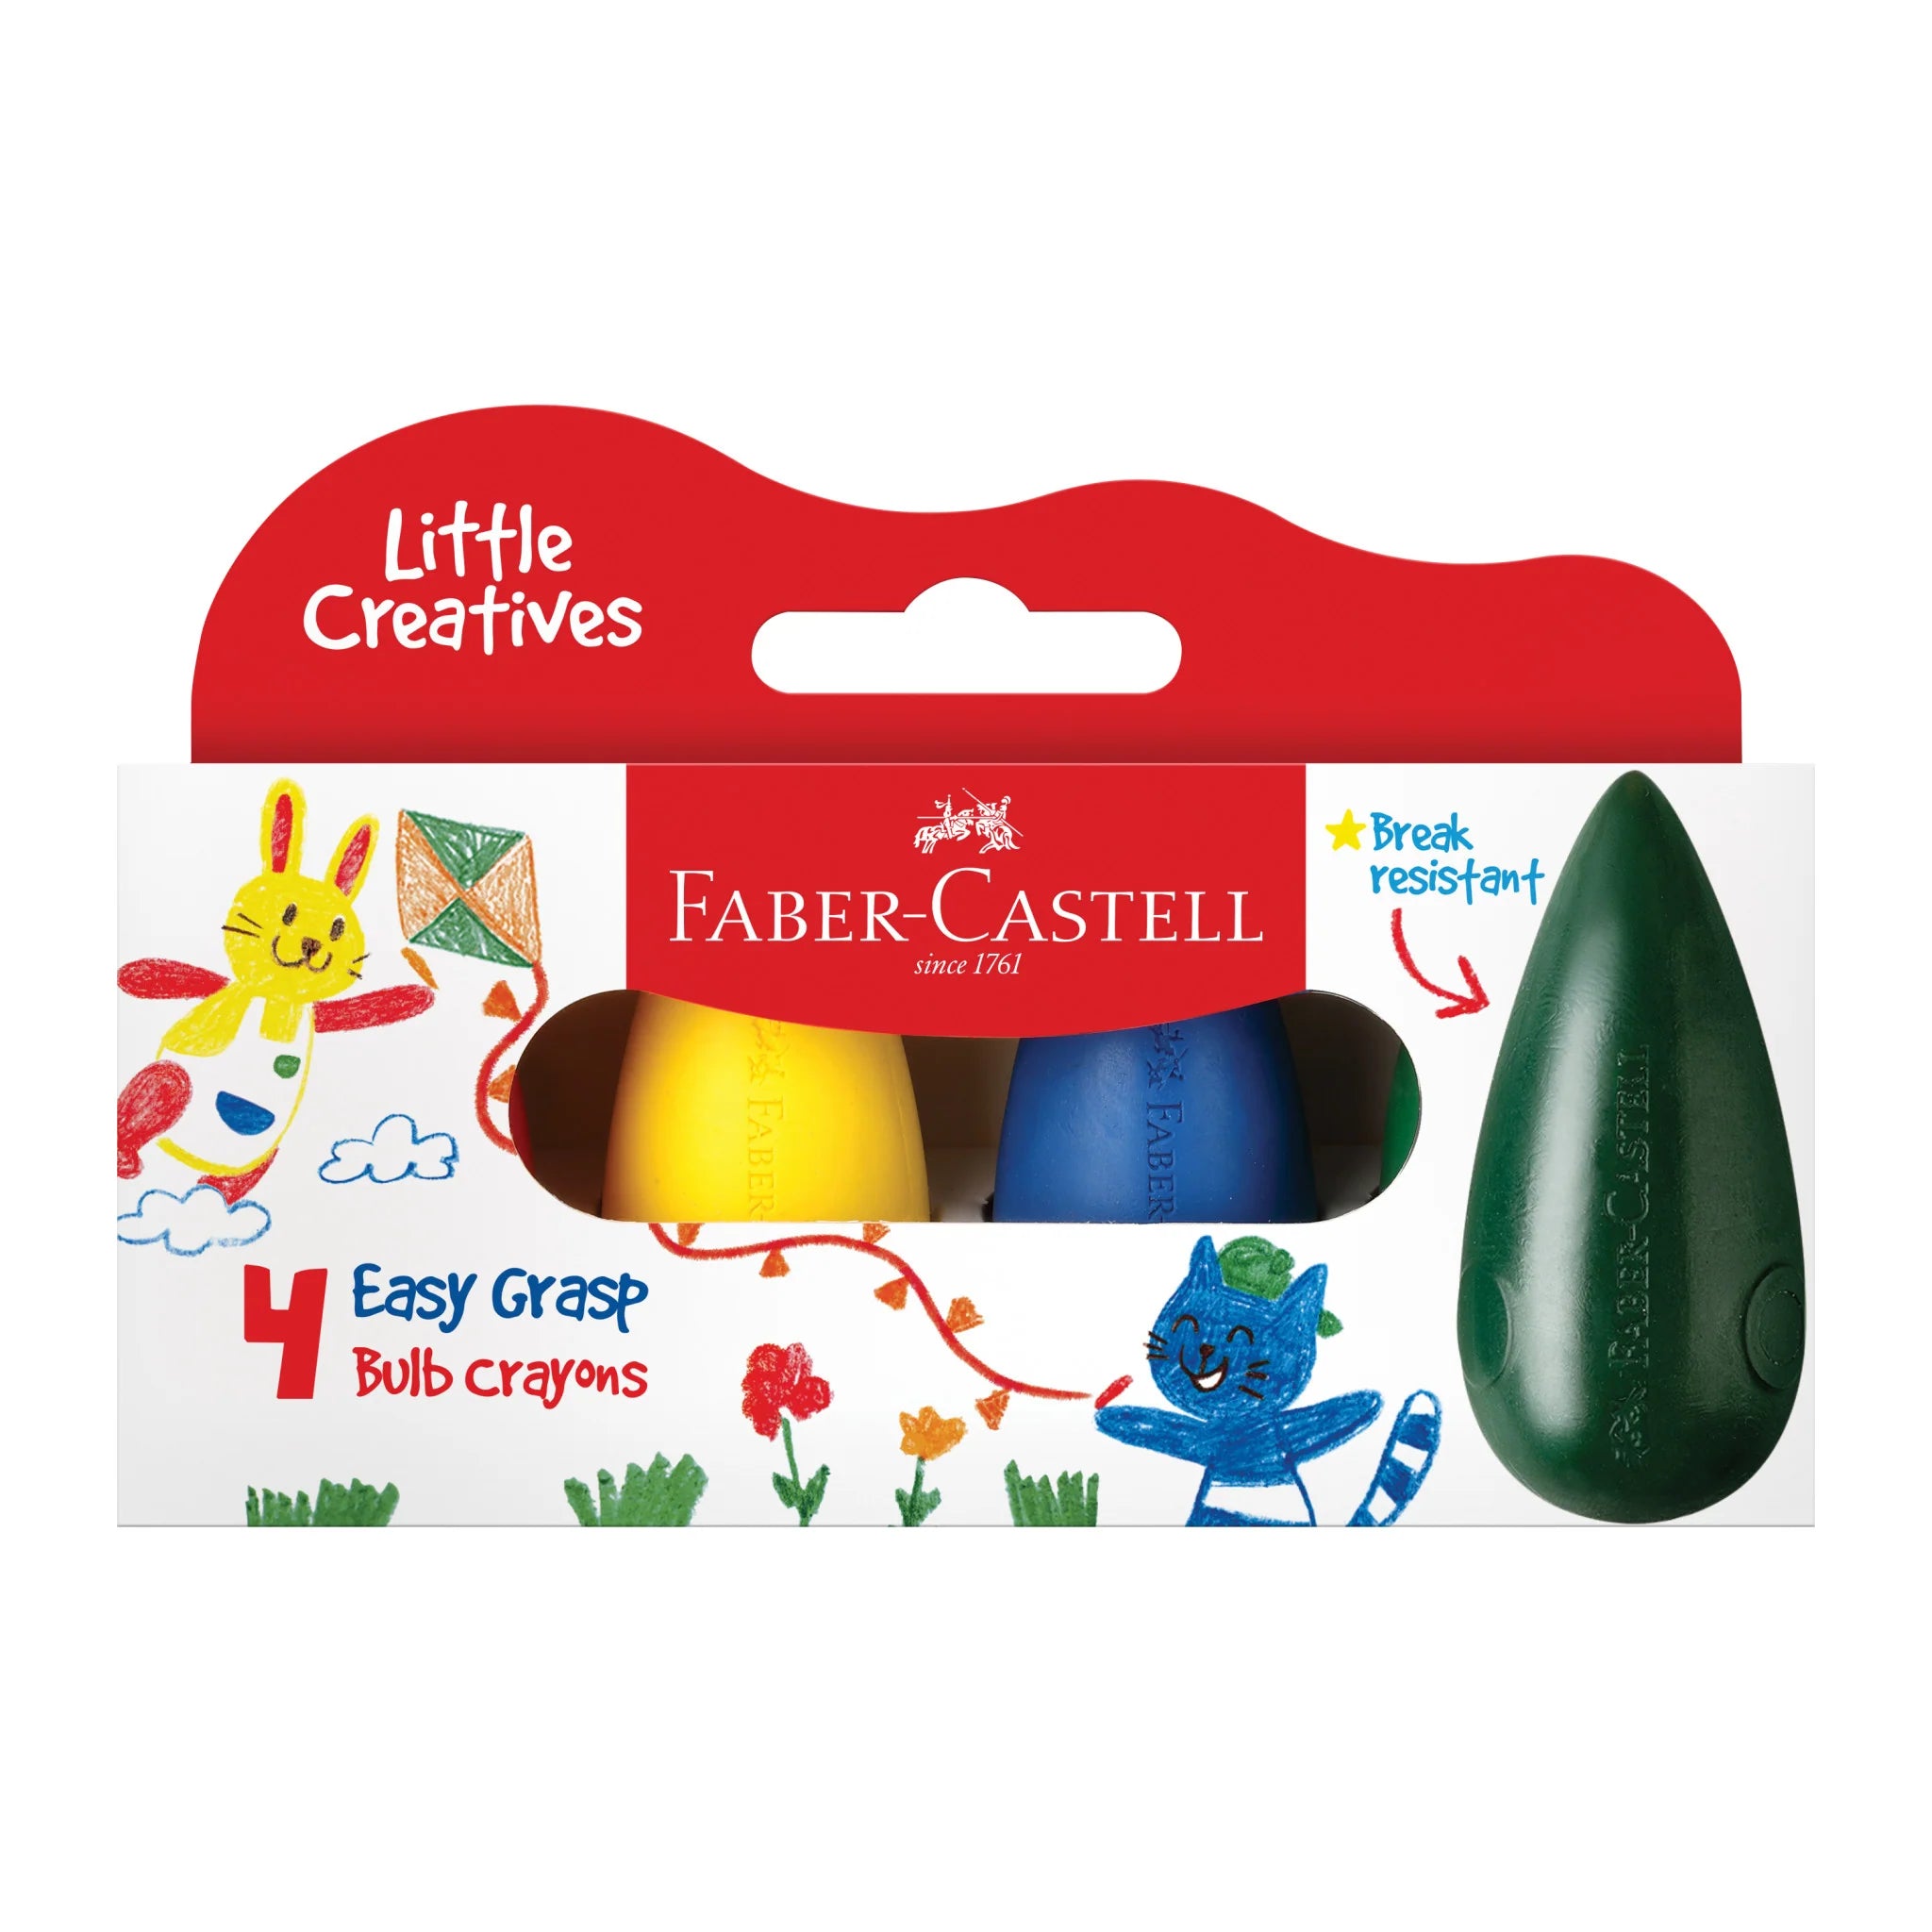 FABER-CASTELL Little Creatives Easy Grasp Bulb Crayons Set of 4